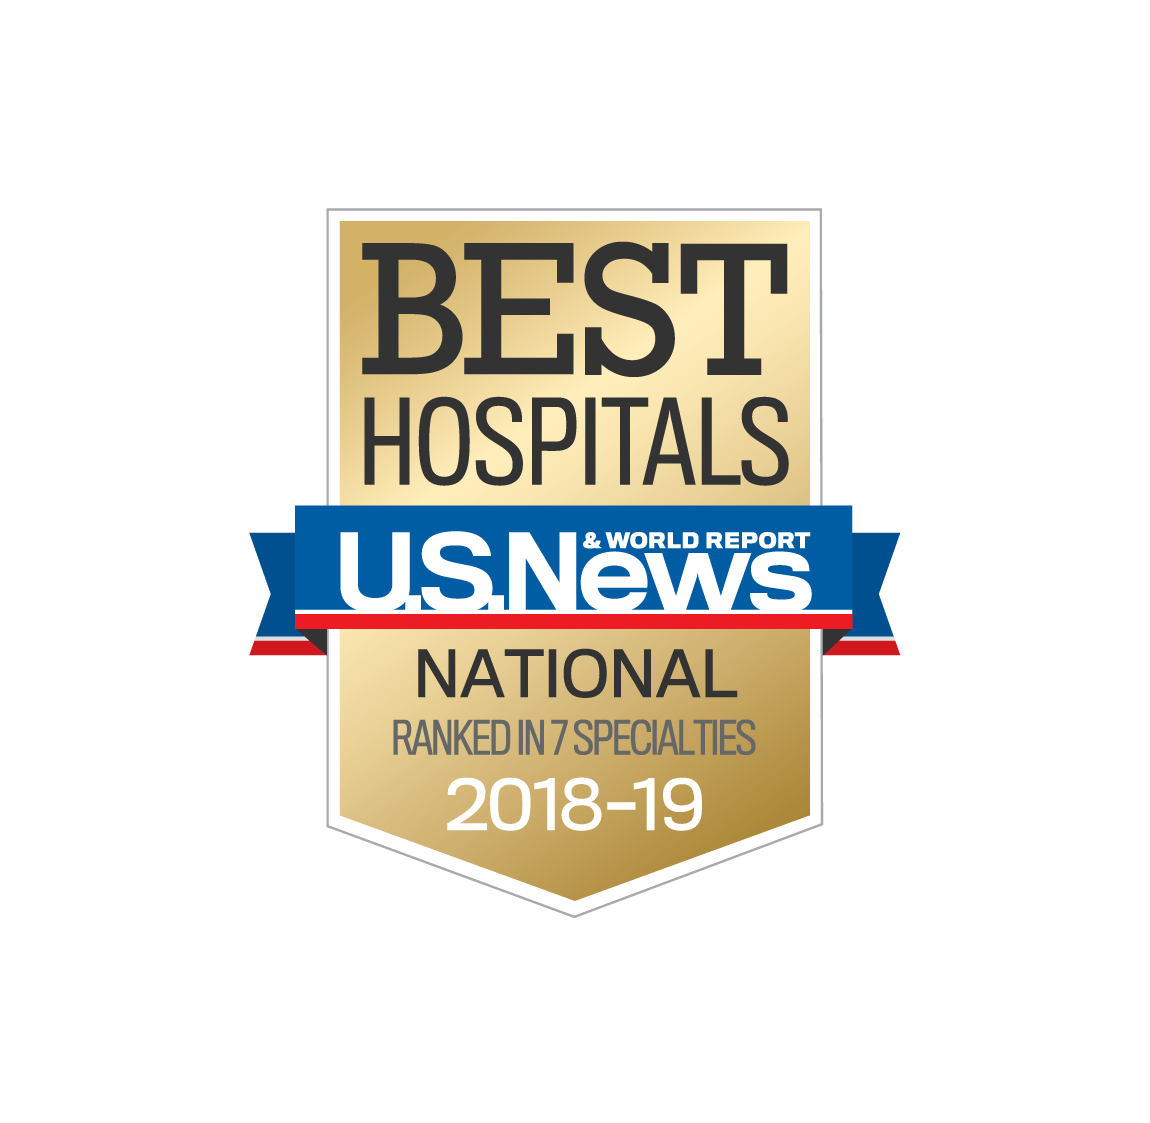 Ranked in 7 specialties by U.S. News